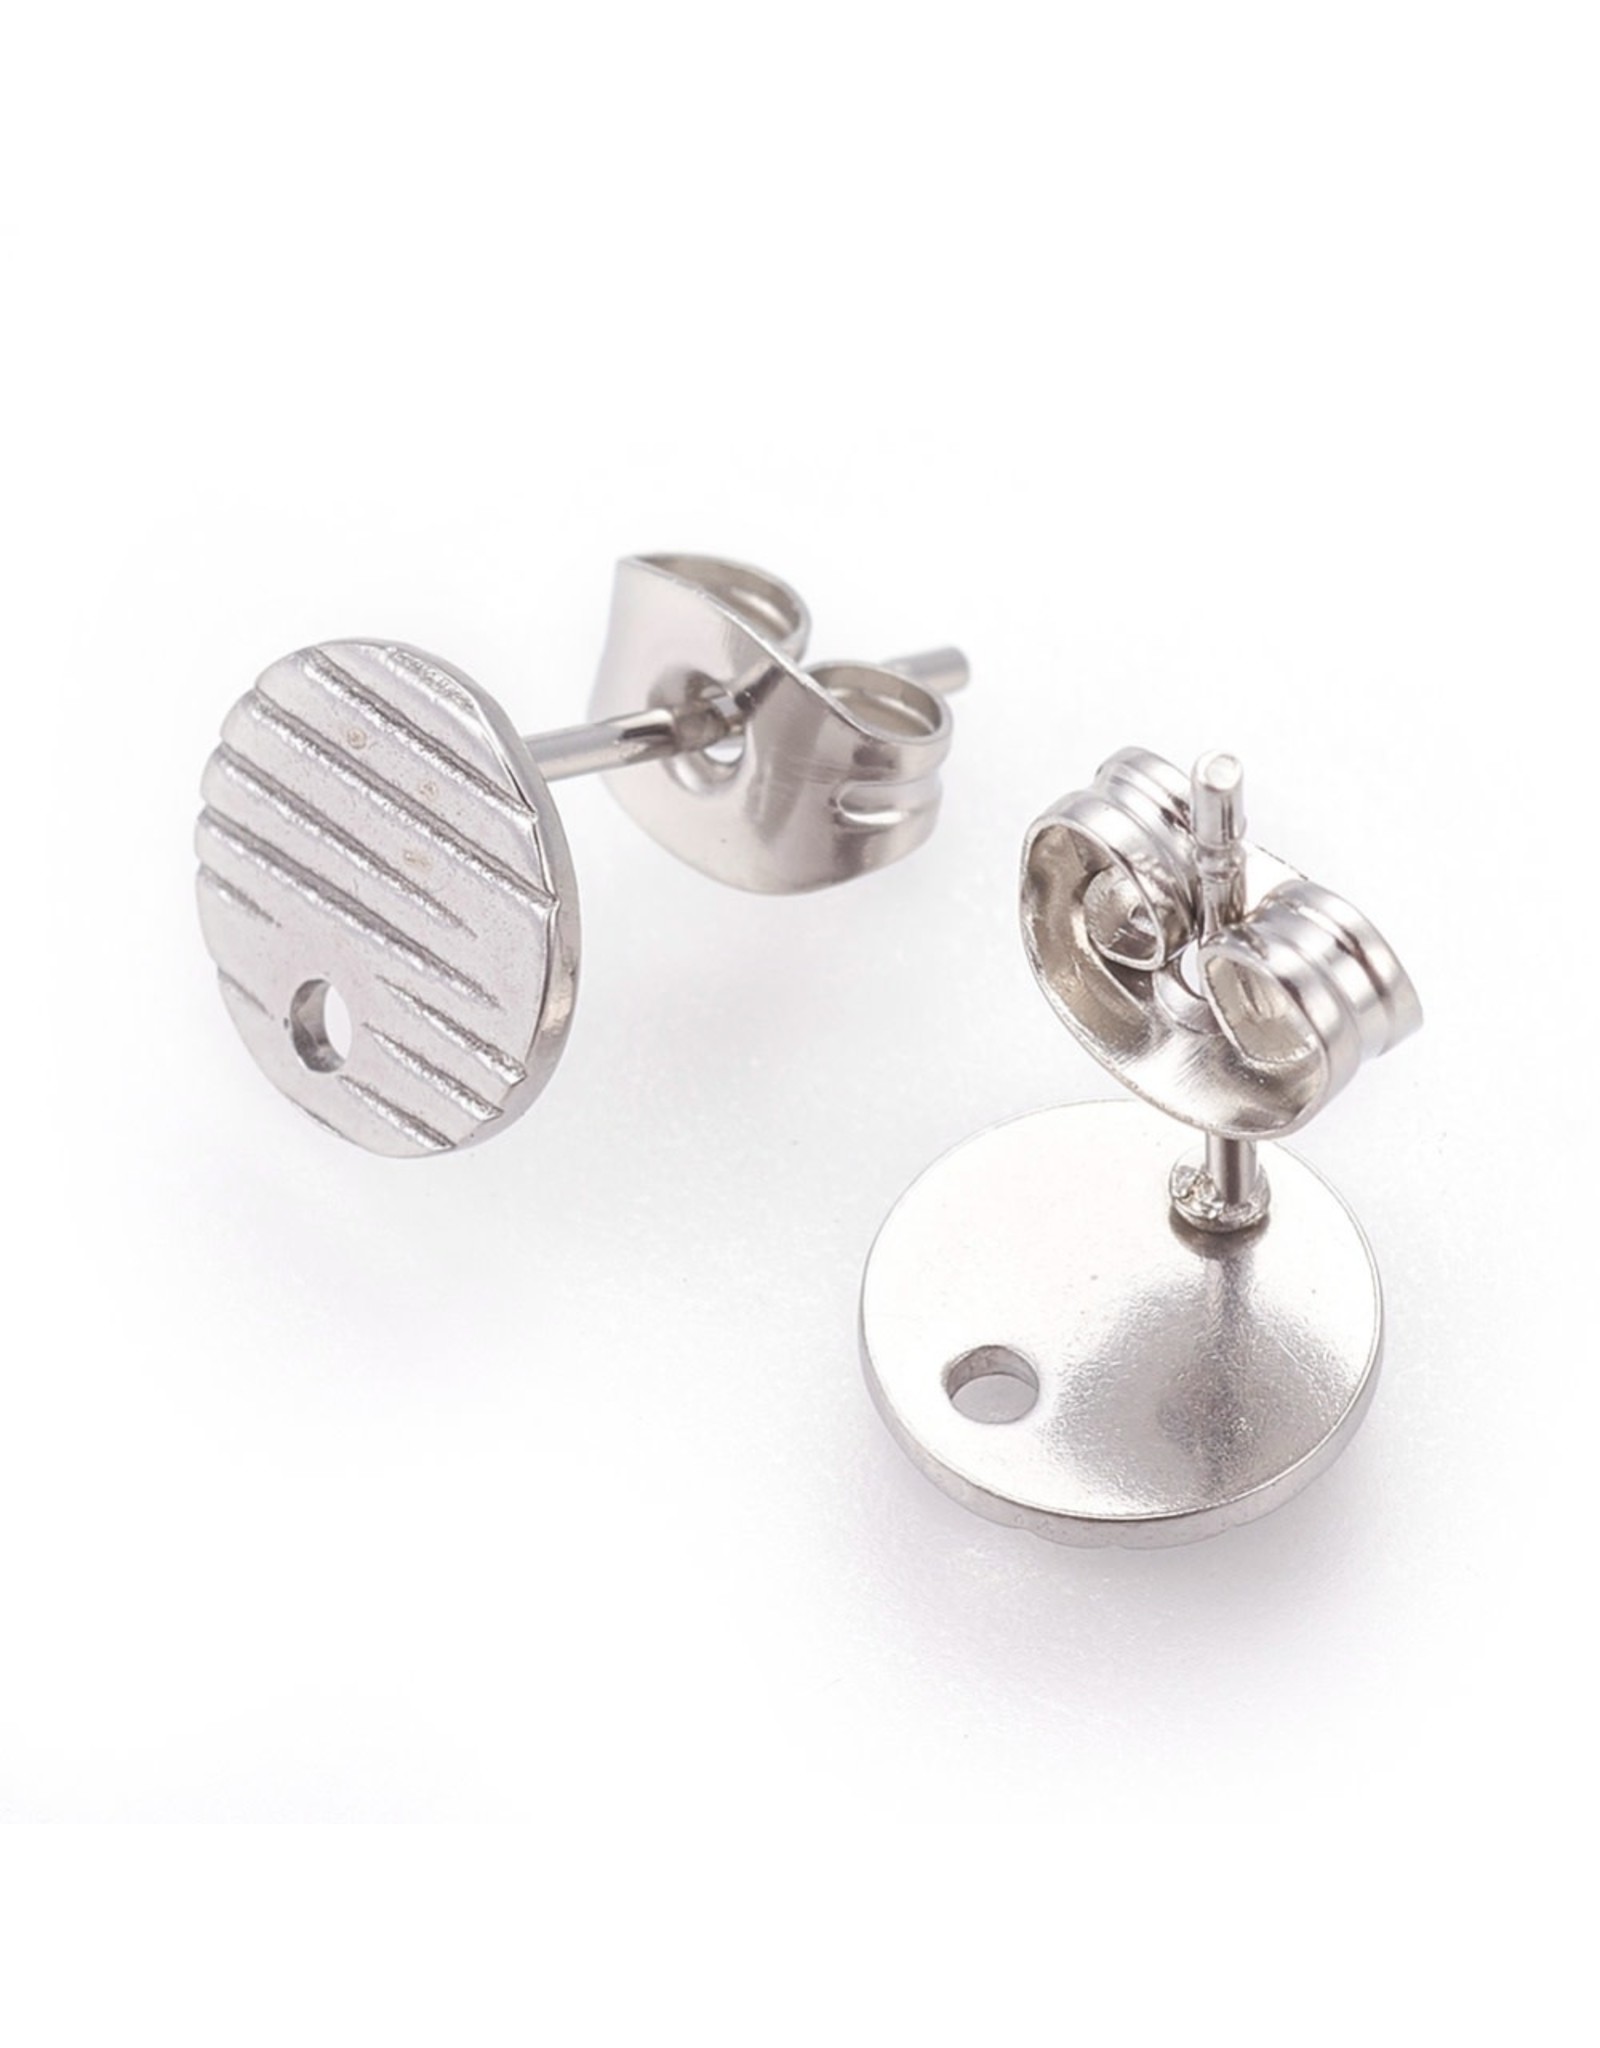 Earring Stud Textured Flat Round 8mm  Stainless Steel  NF x2